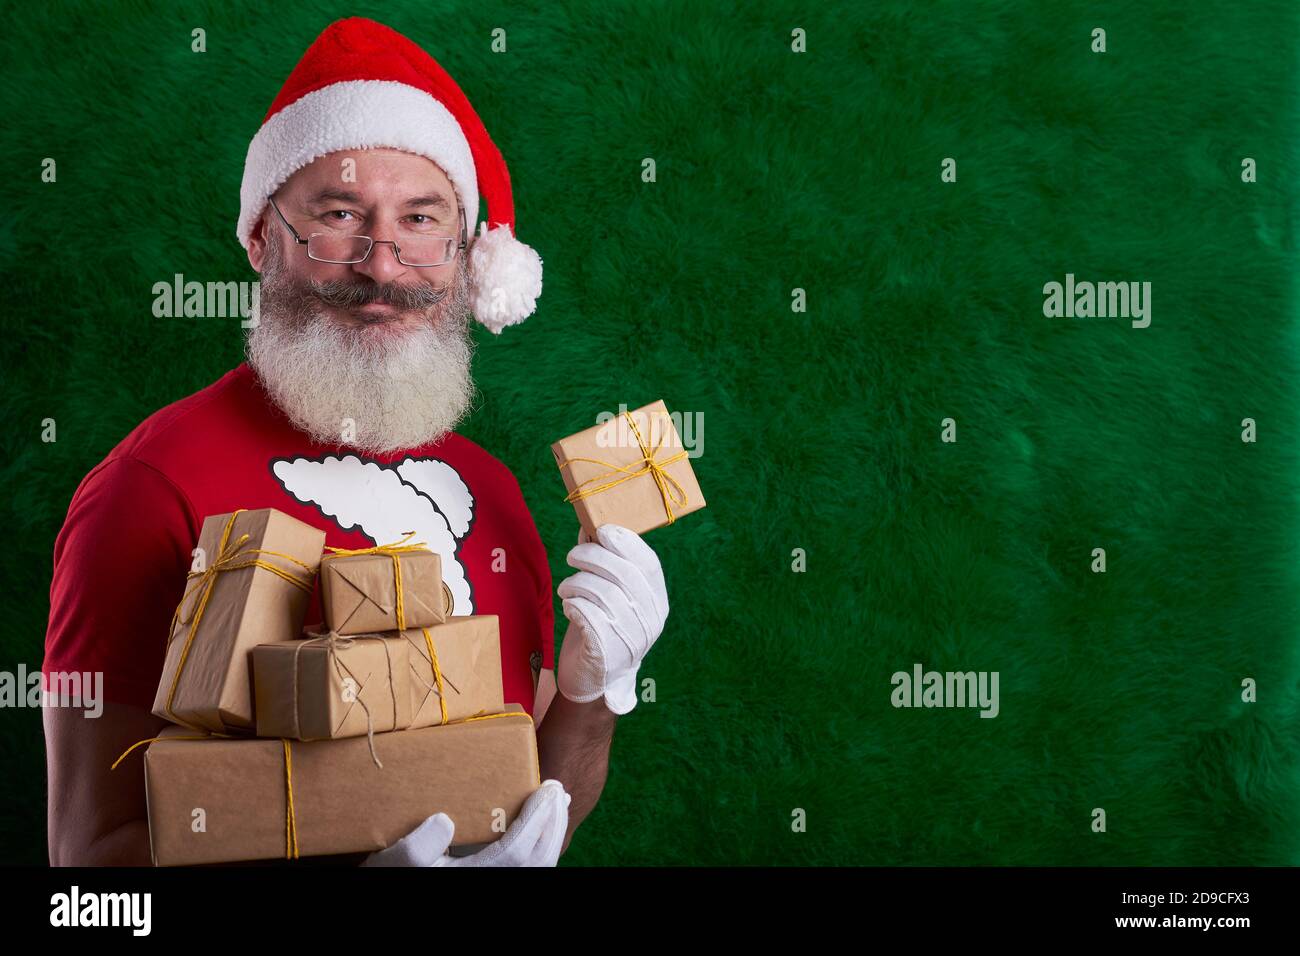 Mature bearded man wearing Santa hat with many gifts in hand, artificial Christmas tree background, copy space Stock Photo